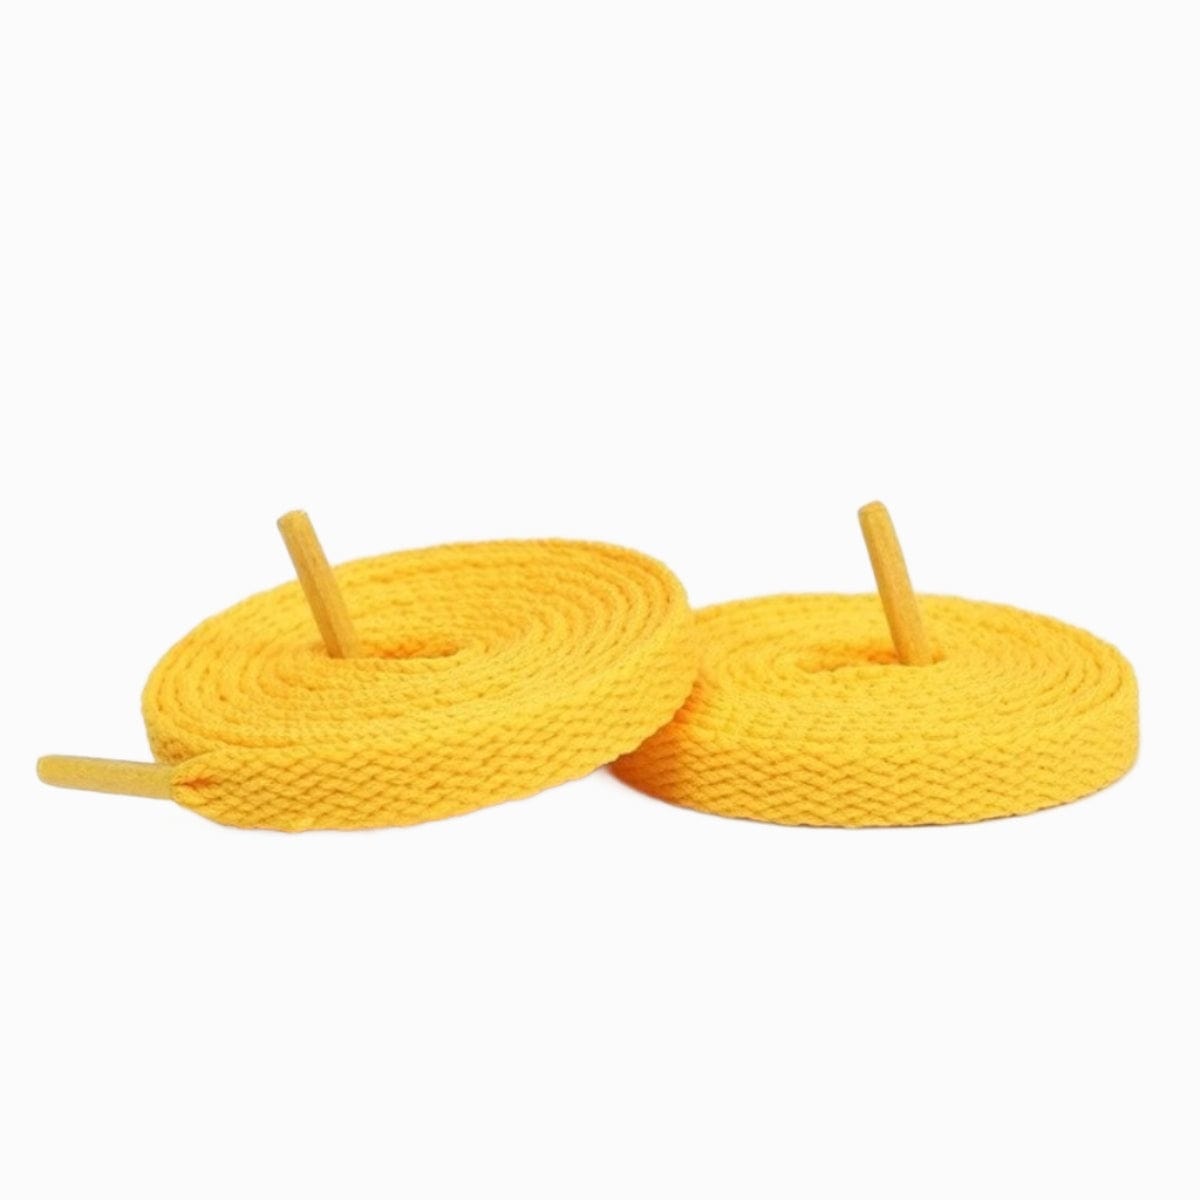 Golden Yellow Replacement Shoe Laces for Adidas Handball Spezial Sneakers by Kicks Shoelaces